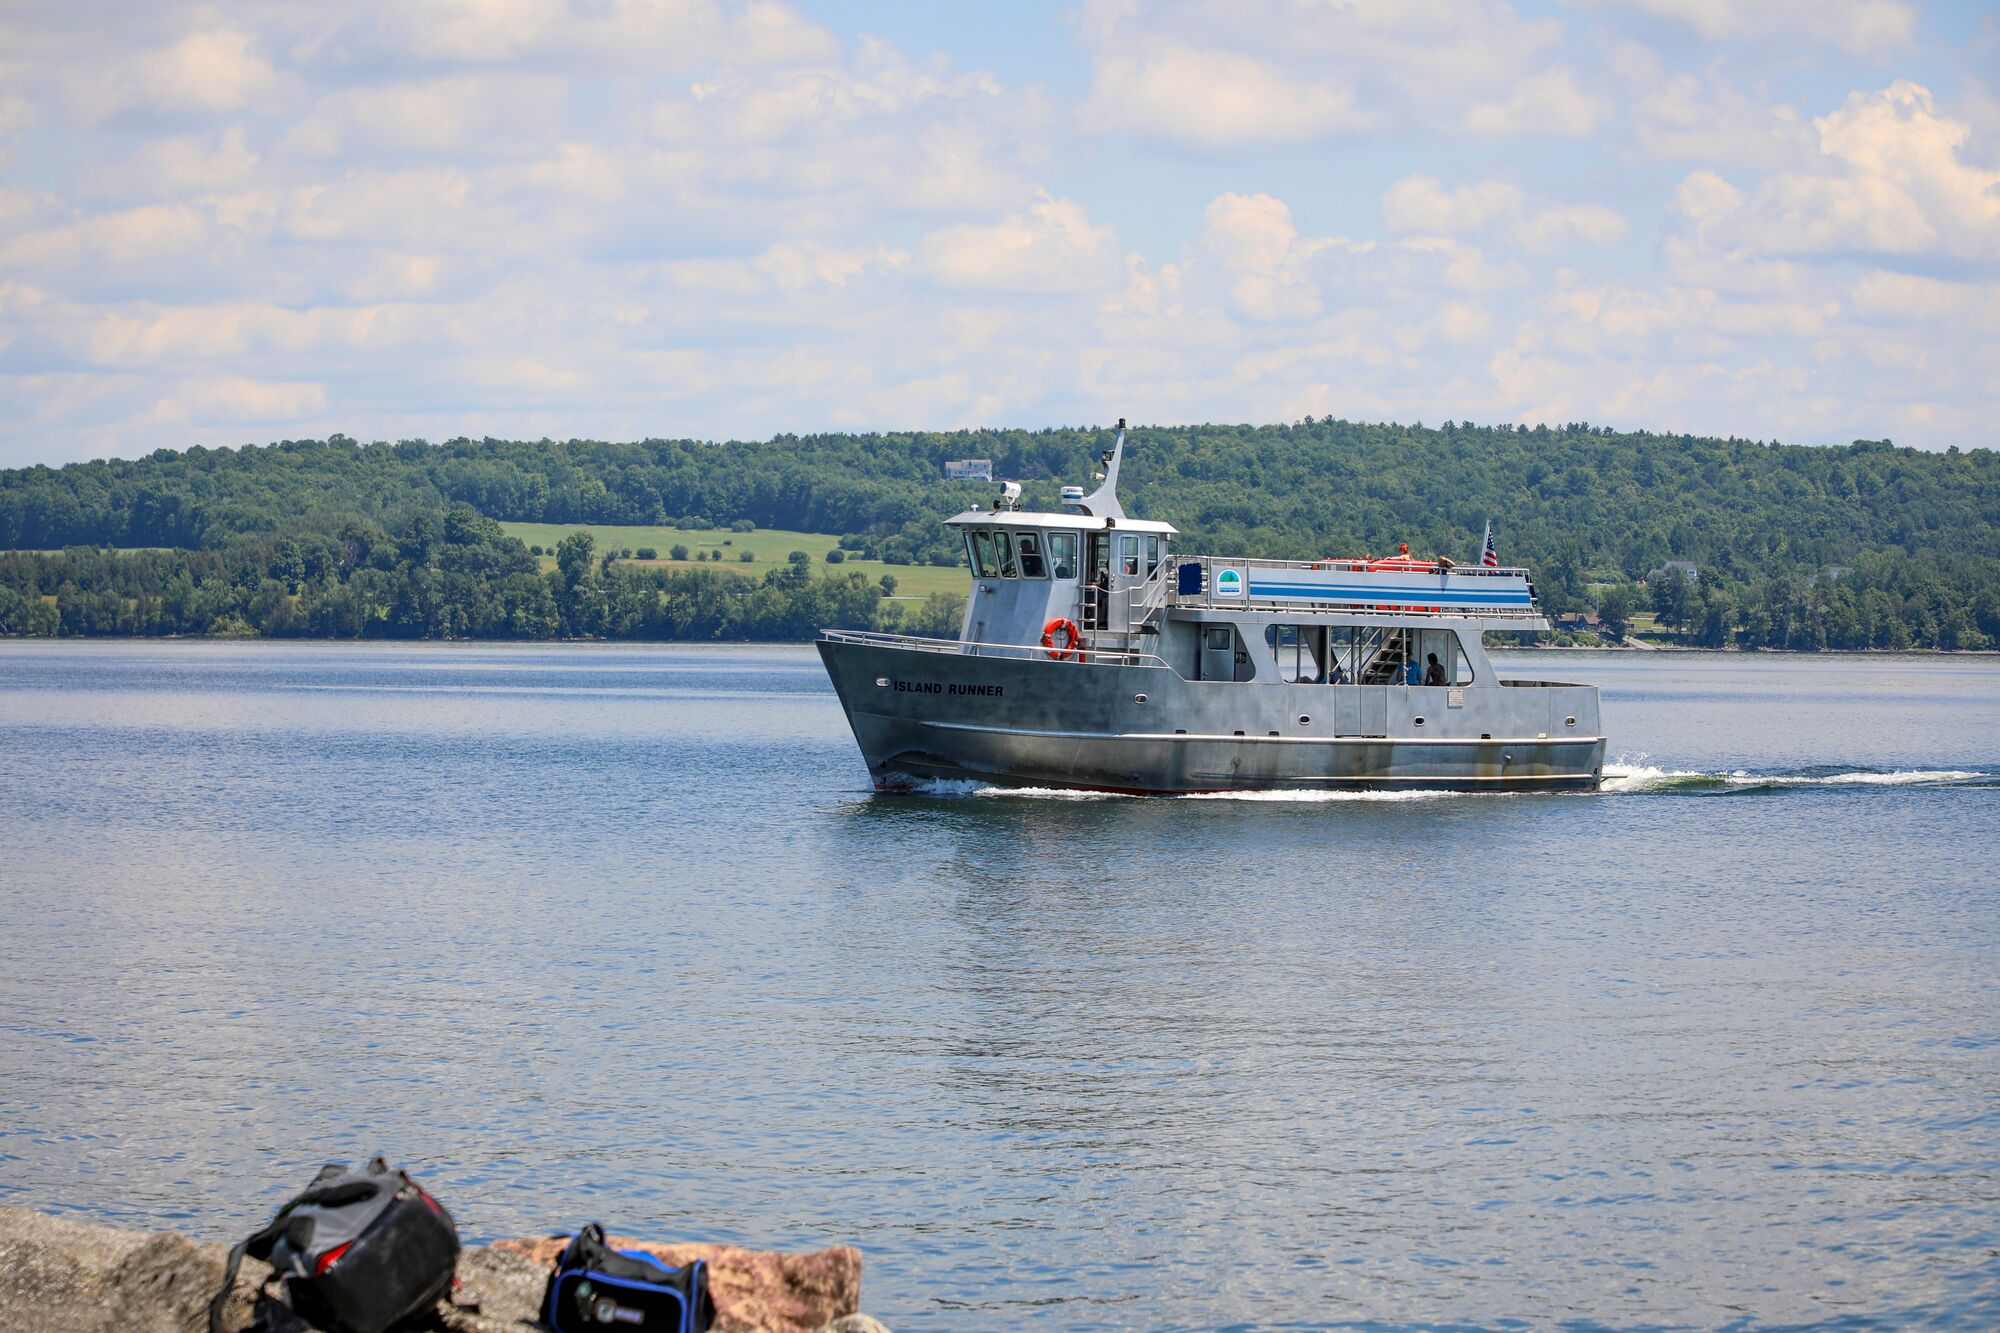 A small ferry boat on a lake on a sunny summer day.